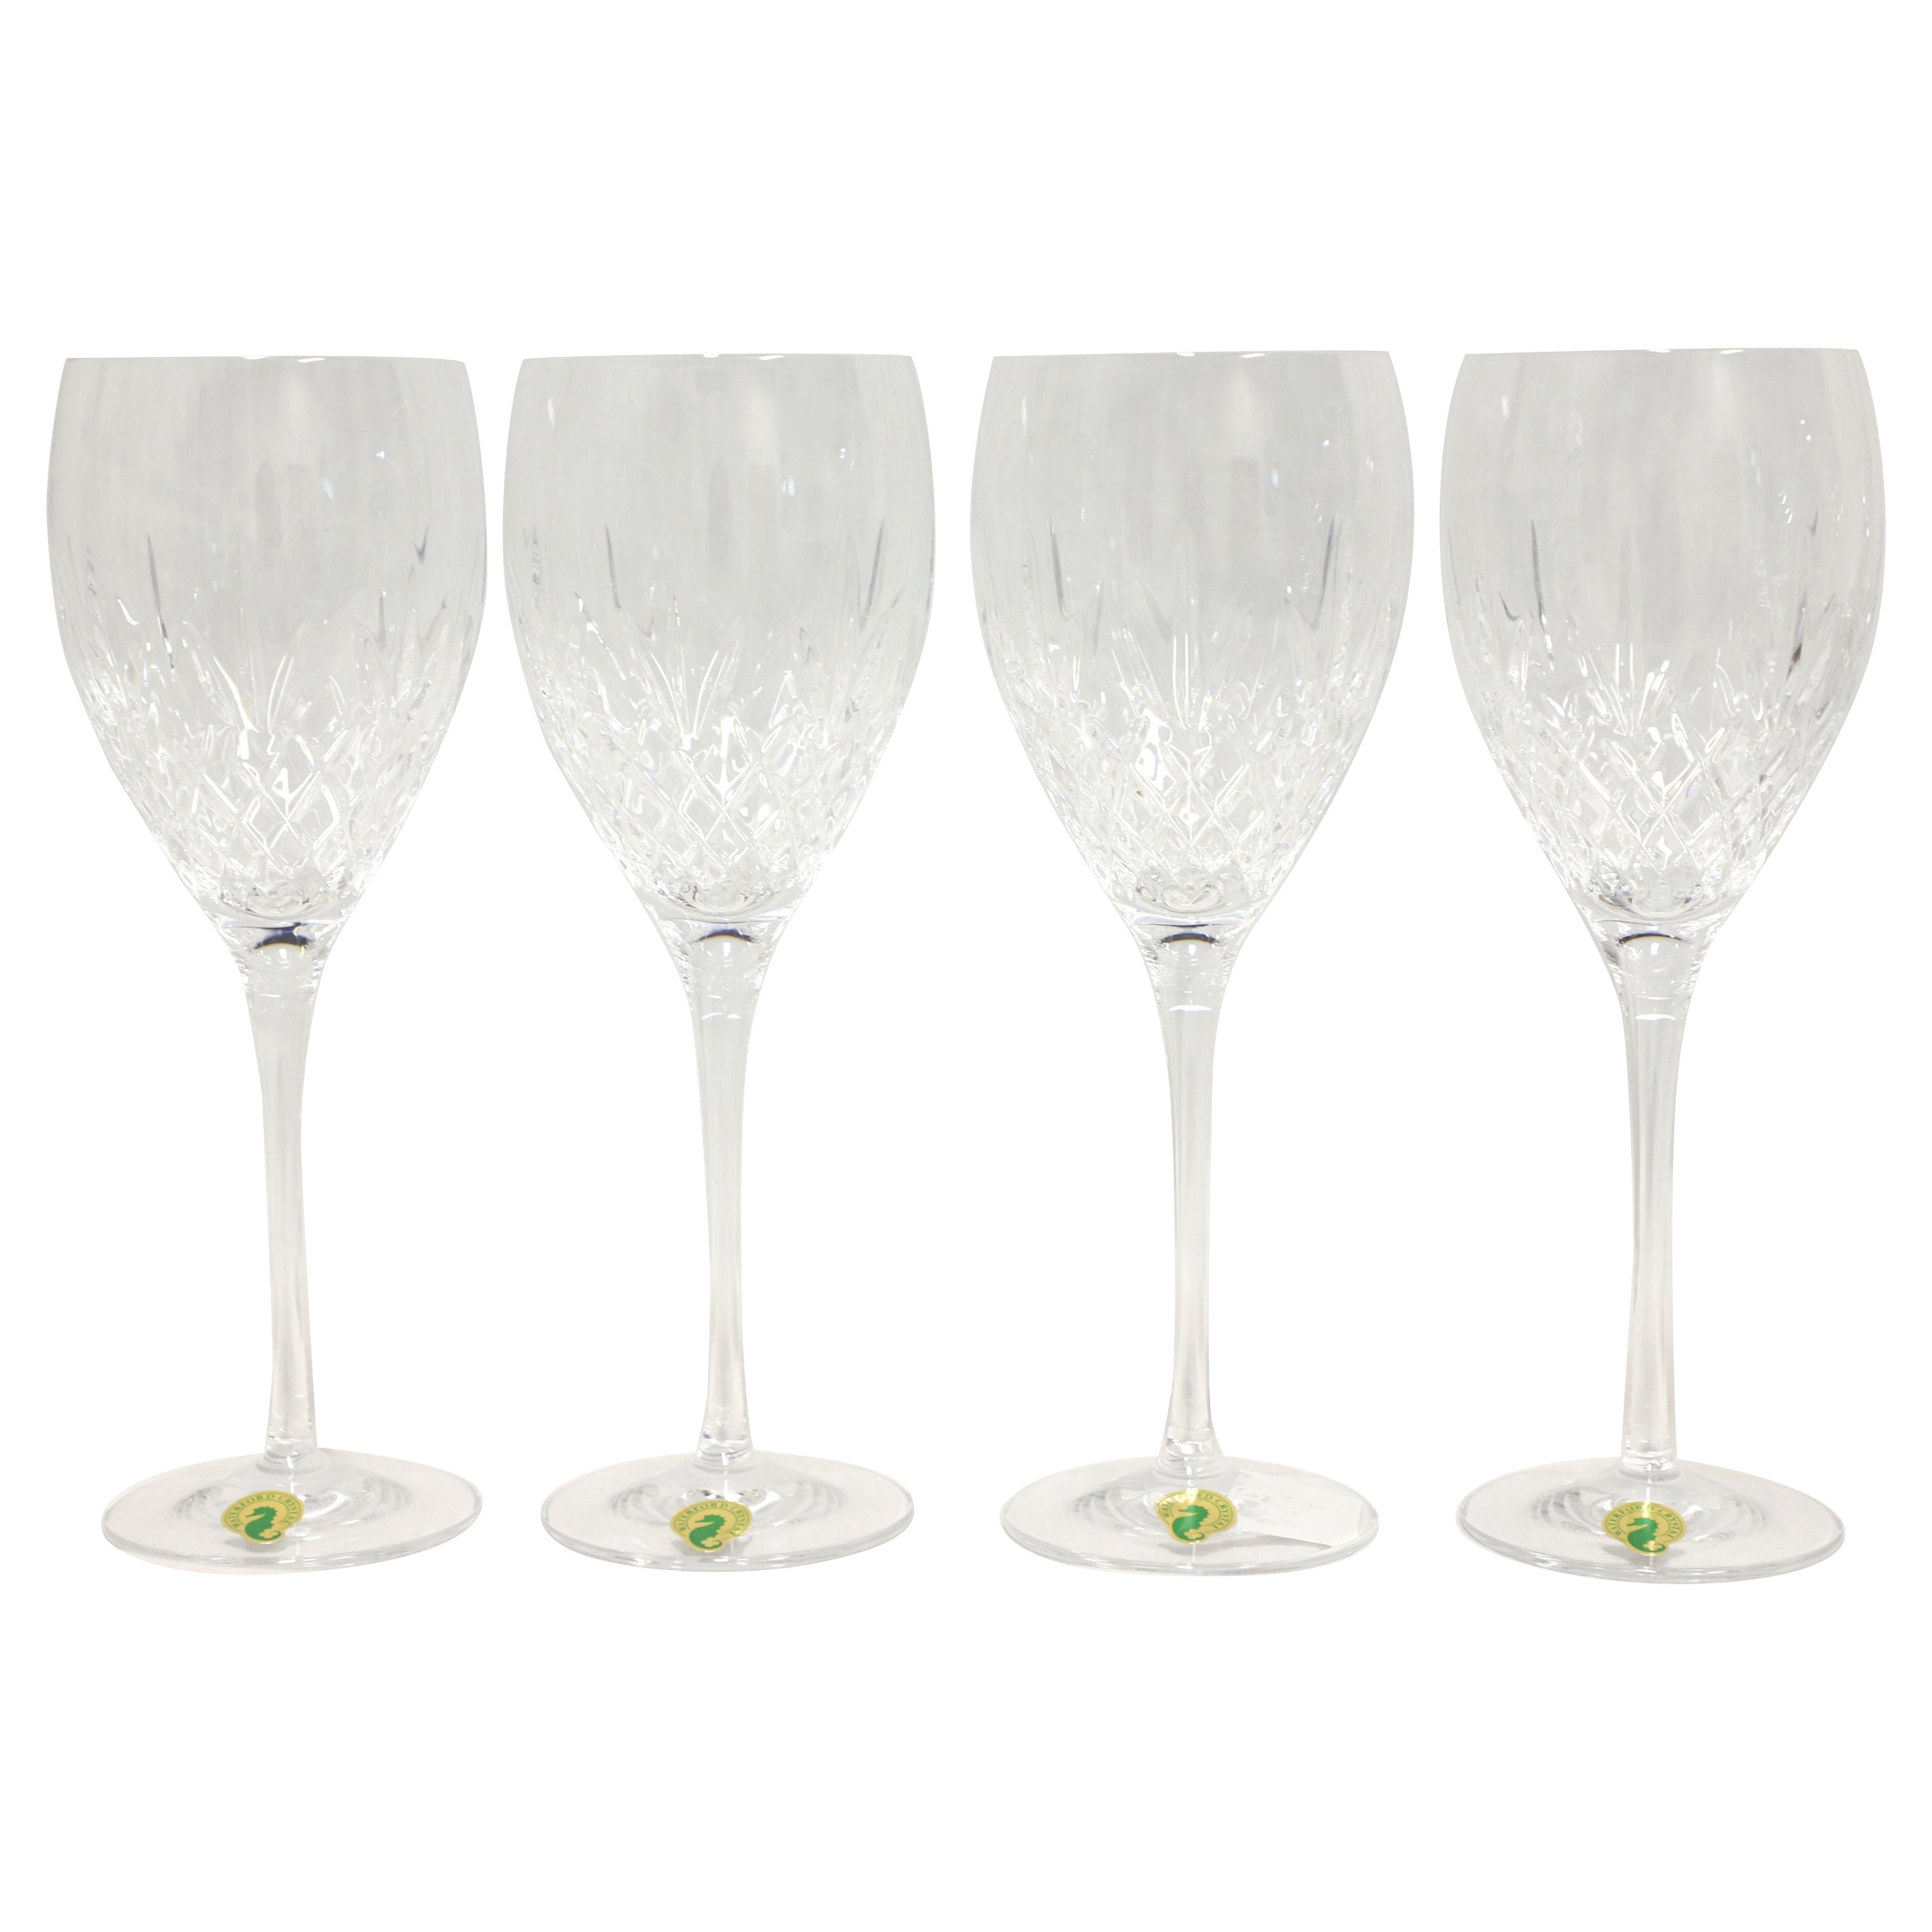 WATERFORD Crystal 9.5" Plaza Goblet - Set of 4 *New in Open Box* For Sale